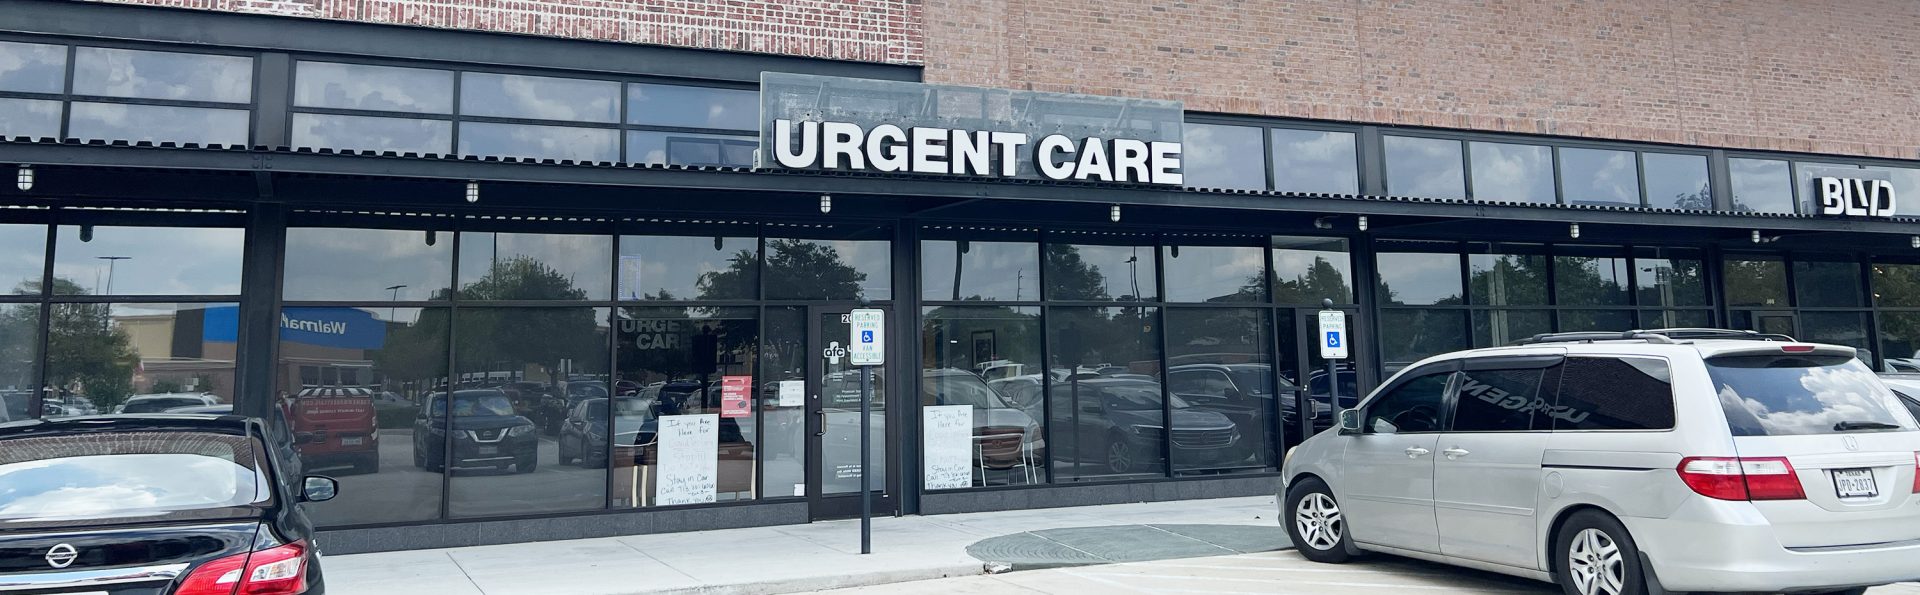 Visit our urgent care center in Houston, TX